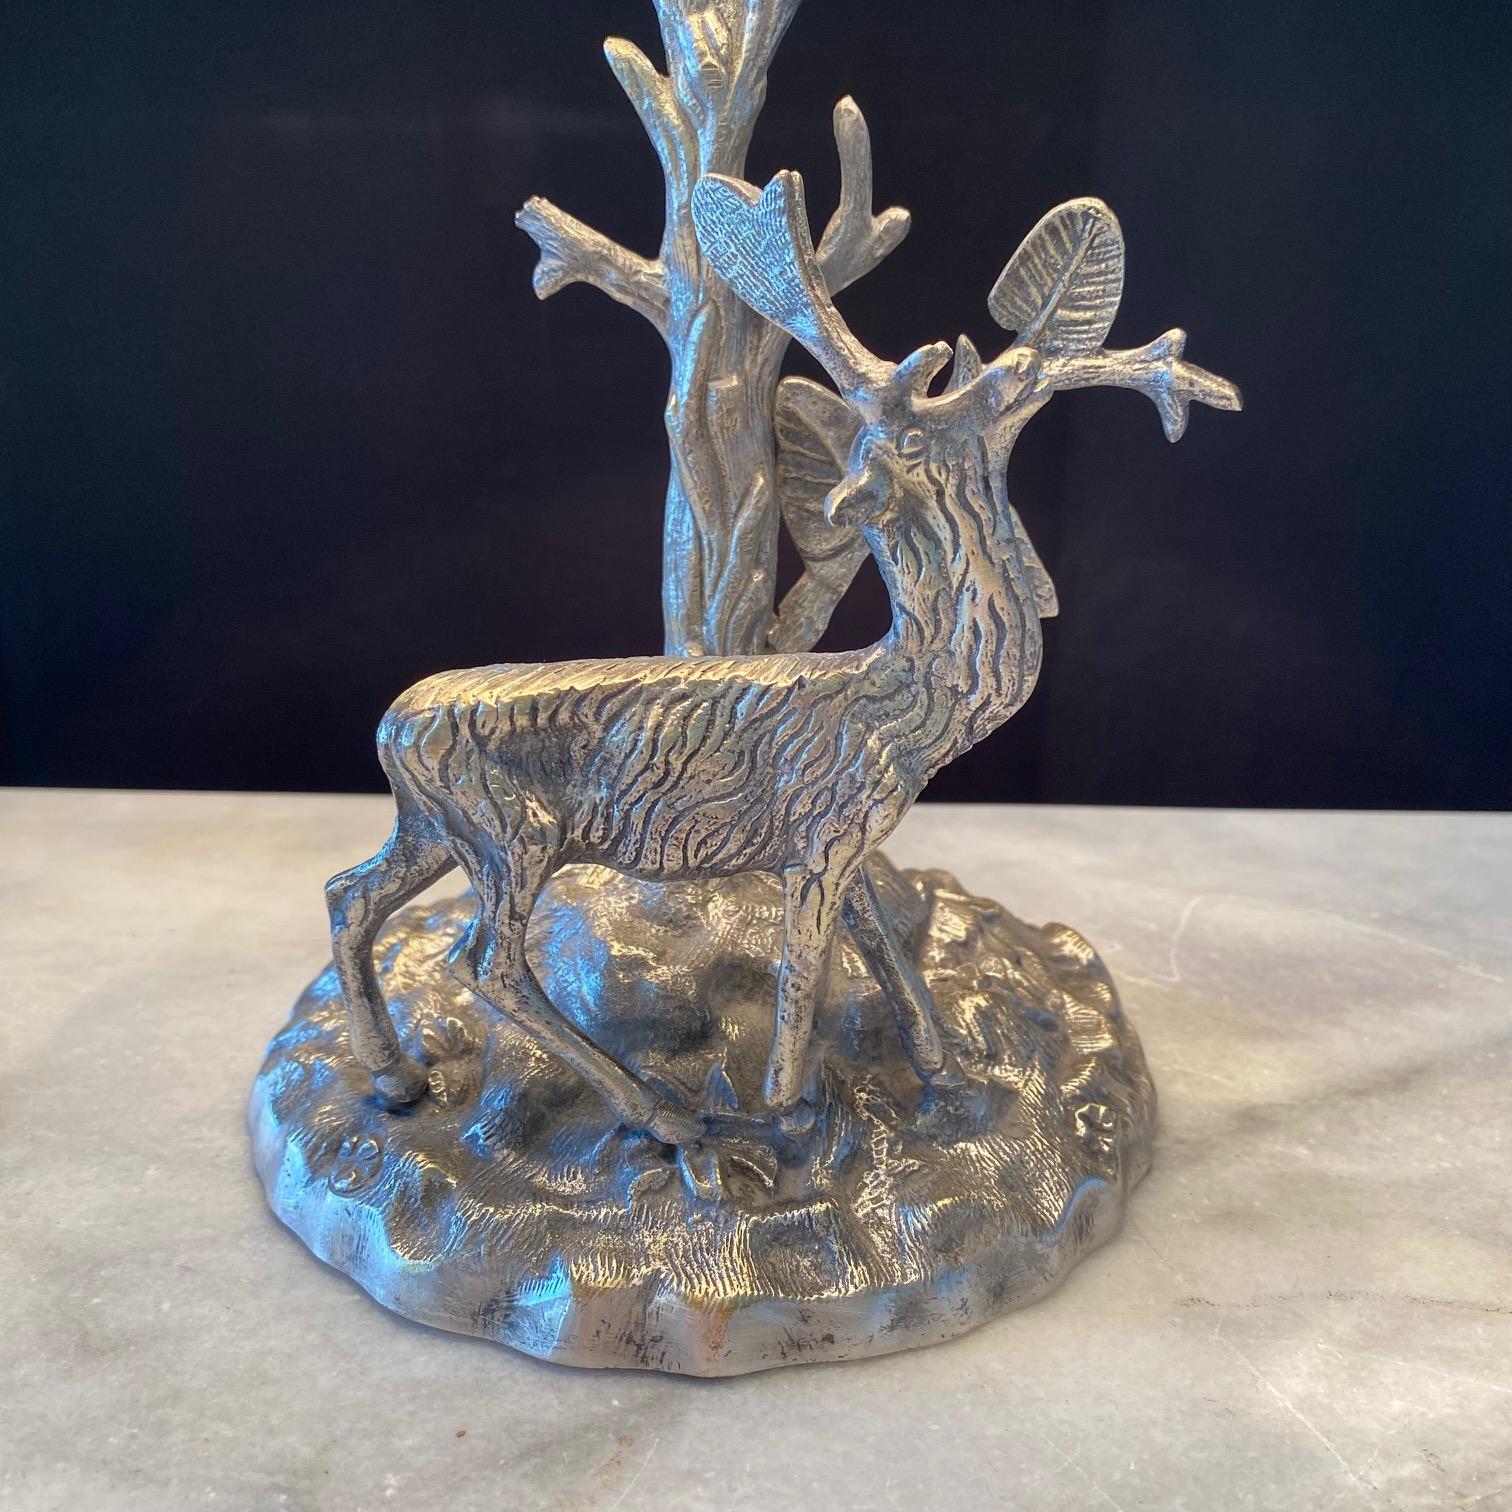  Silver Plated Bronze Deer Sculpture Table Lamp with Leaves and Twigs  5